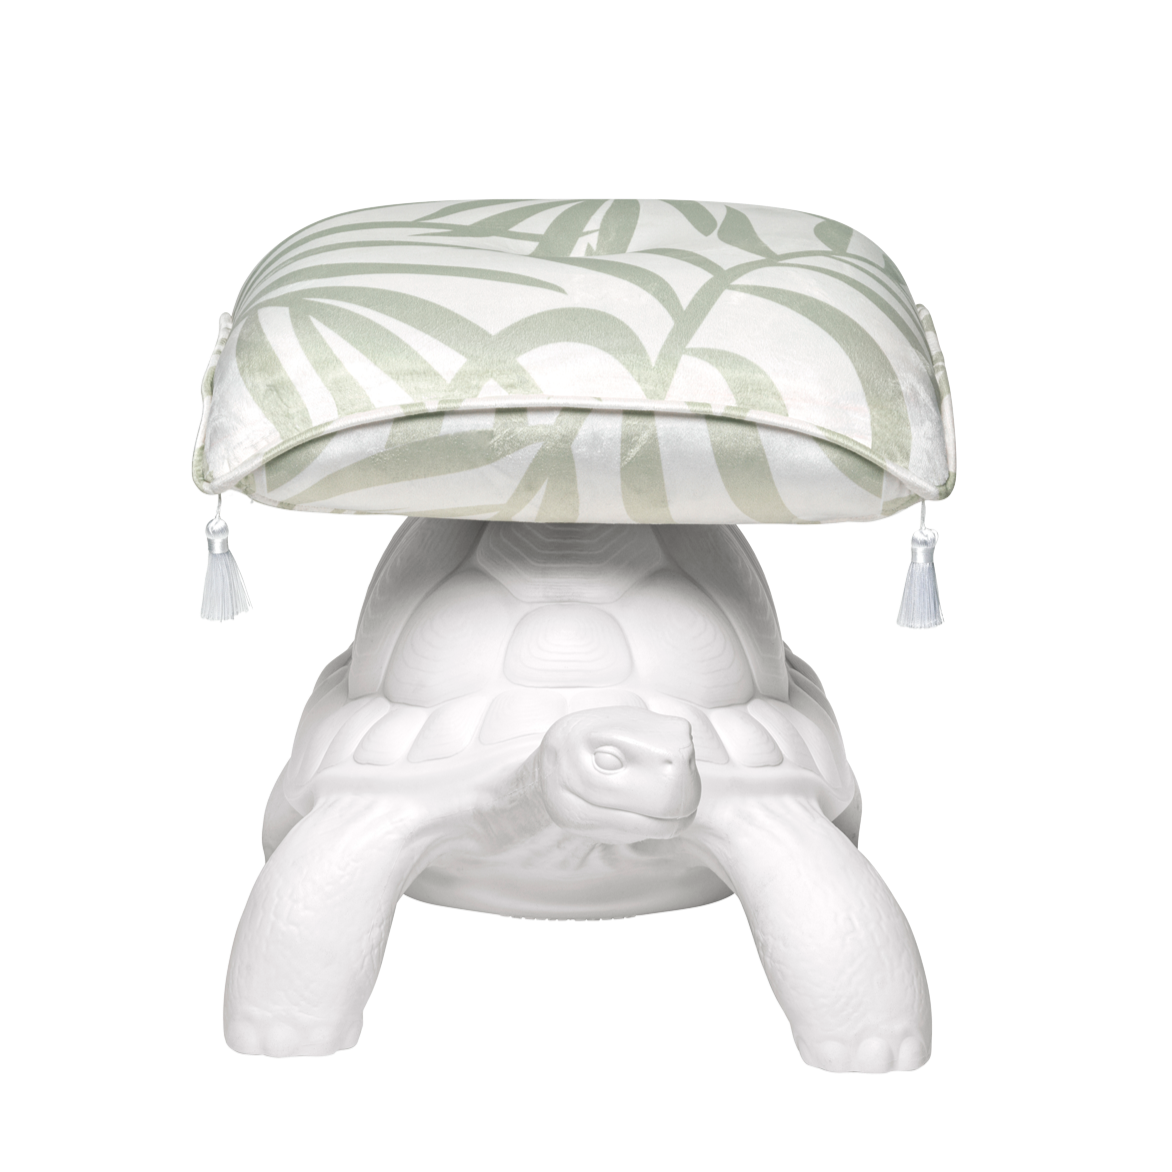 This nice, multifunctional turtle is another unusual Marcantonio project. The durable turtle armor maintains an elegant pillow, which is ideal as an unusual seat.